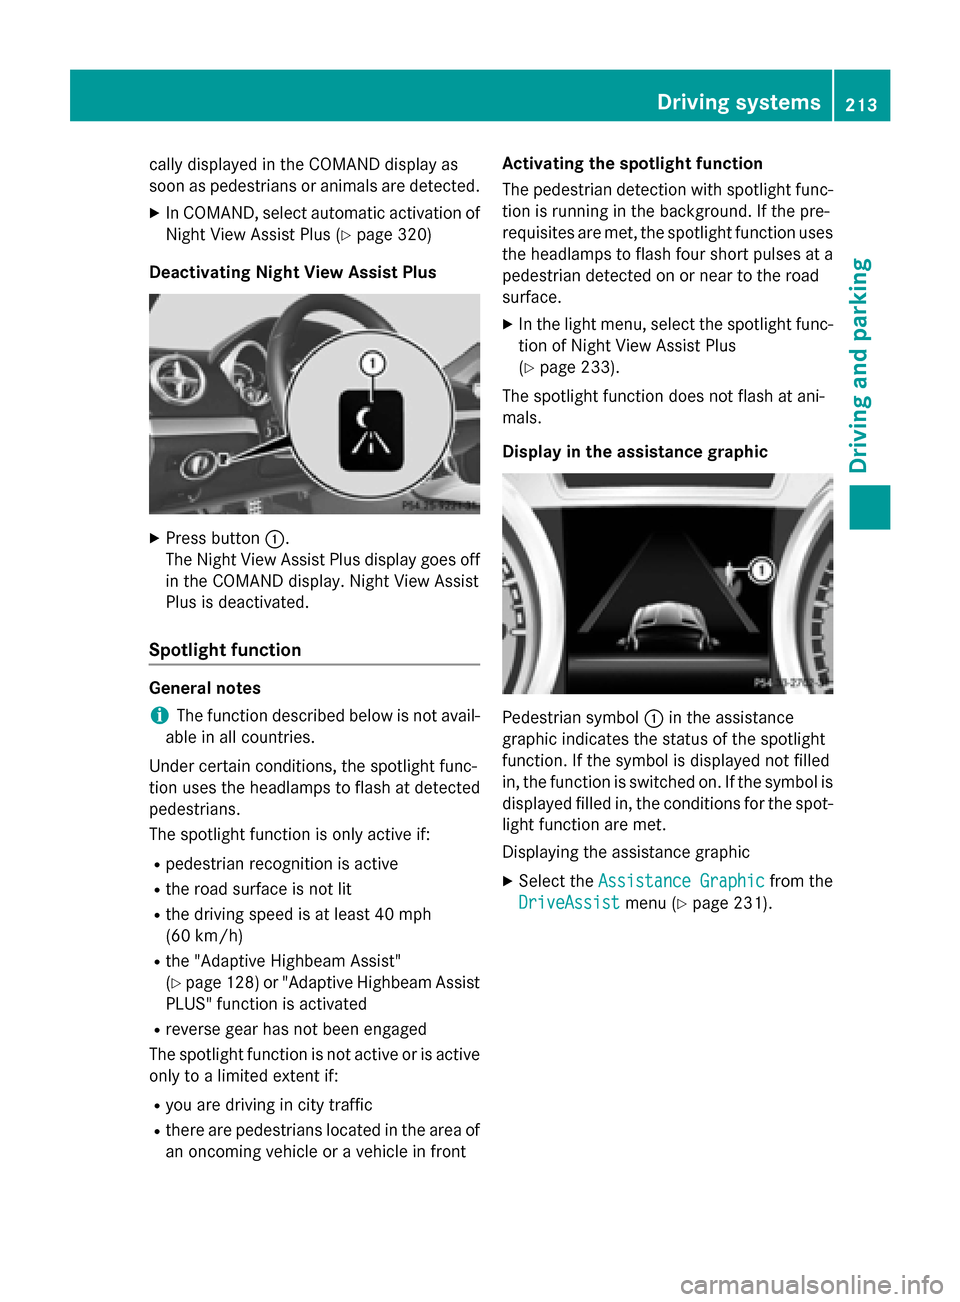 MERCEDES-BENZ SL-Class 2016 R231 Owners Manual cally displayed in the COMAND display as
soon as pedestrians or animals are detected.
XIn COMAND, select automatic activation of
Night View Assist Plus (
Ypage 320)
Deactivating Night View Assist Plus